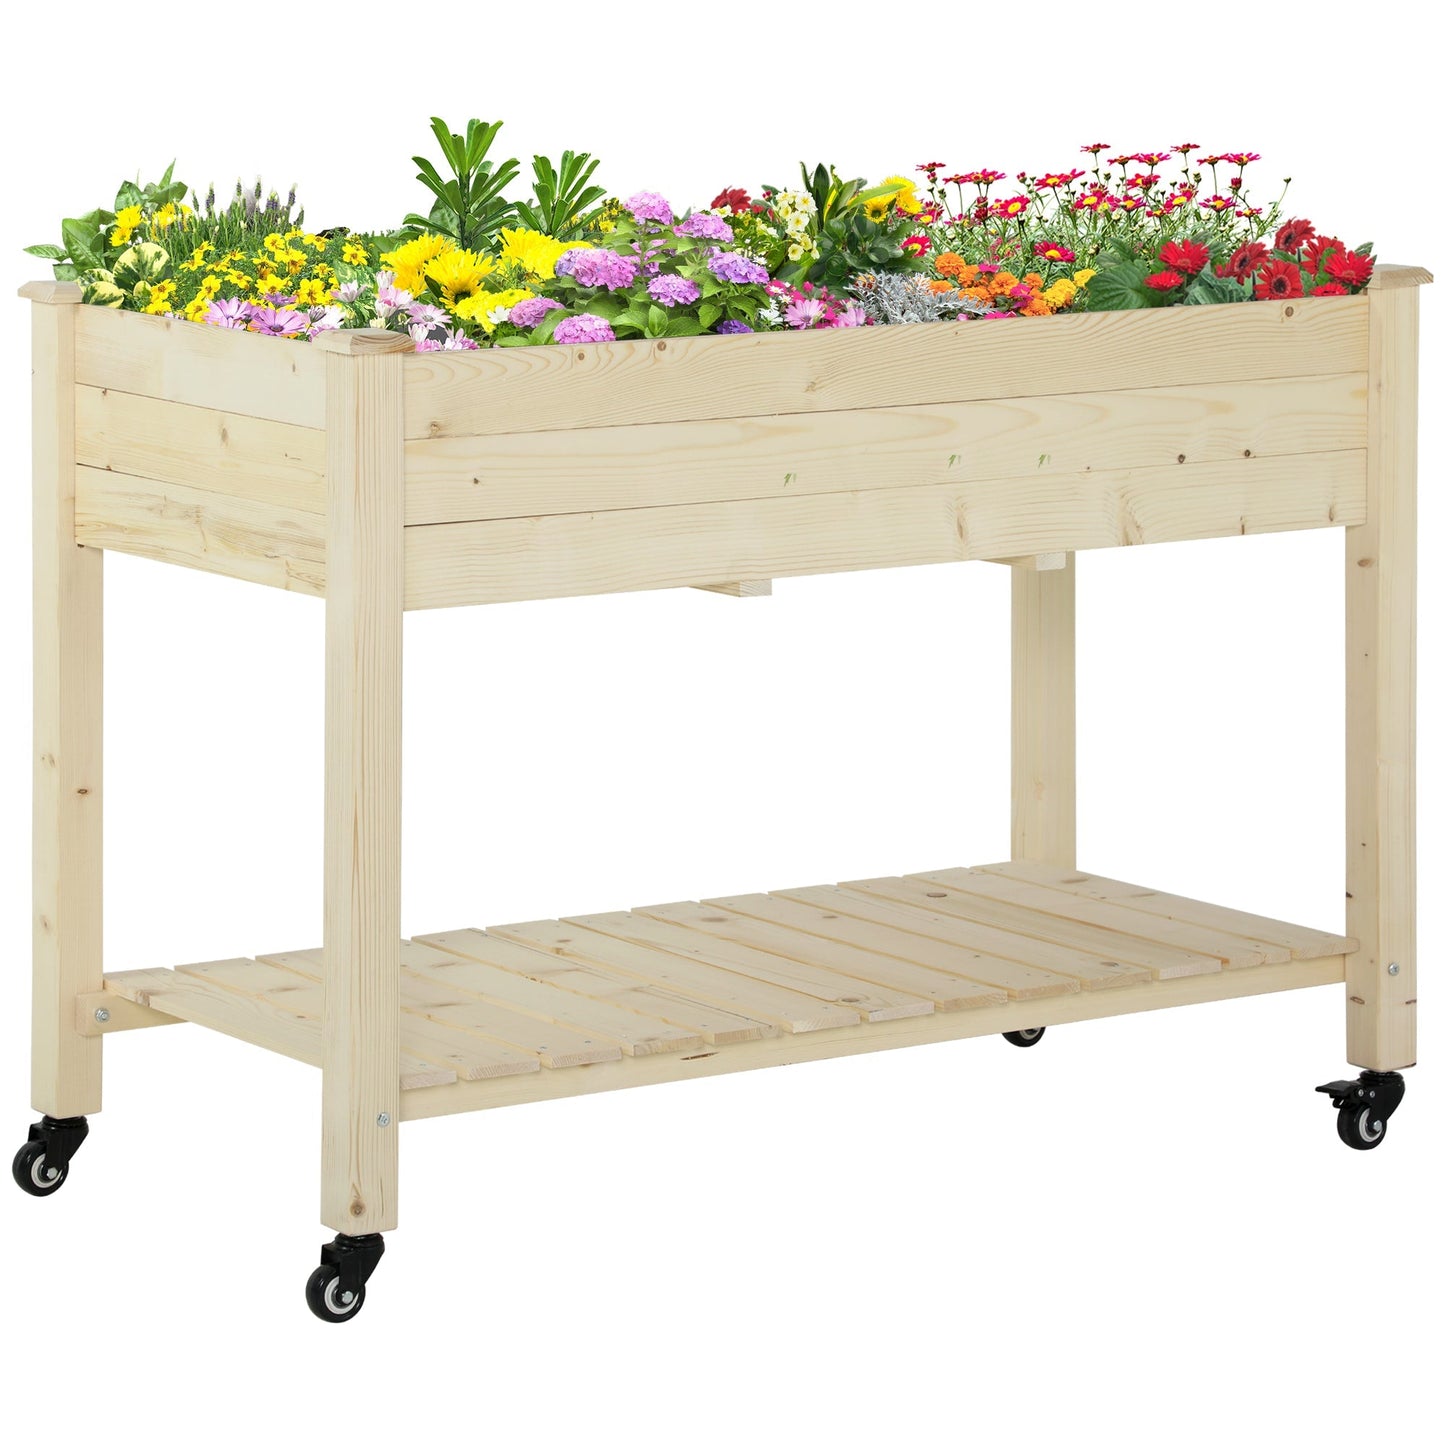 Mobile Raised Garden Bed Elevated Wood Planter Box w/ Lockable Wheels, Storage Shelf for Herbs Vegetables, Natural at Gallery Canada